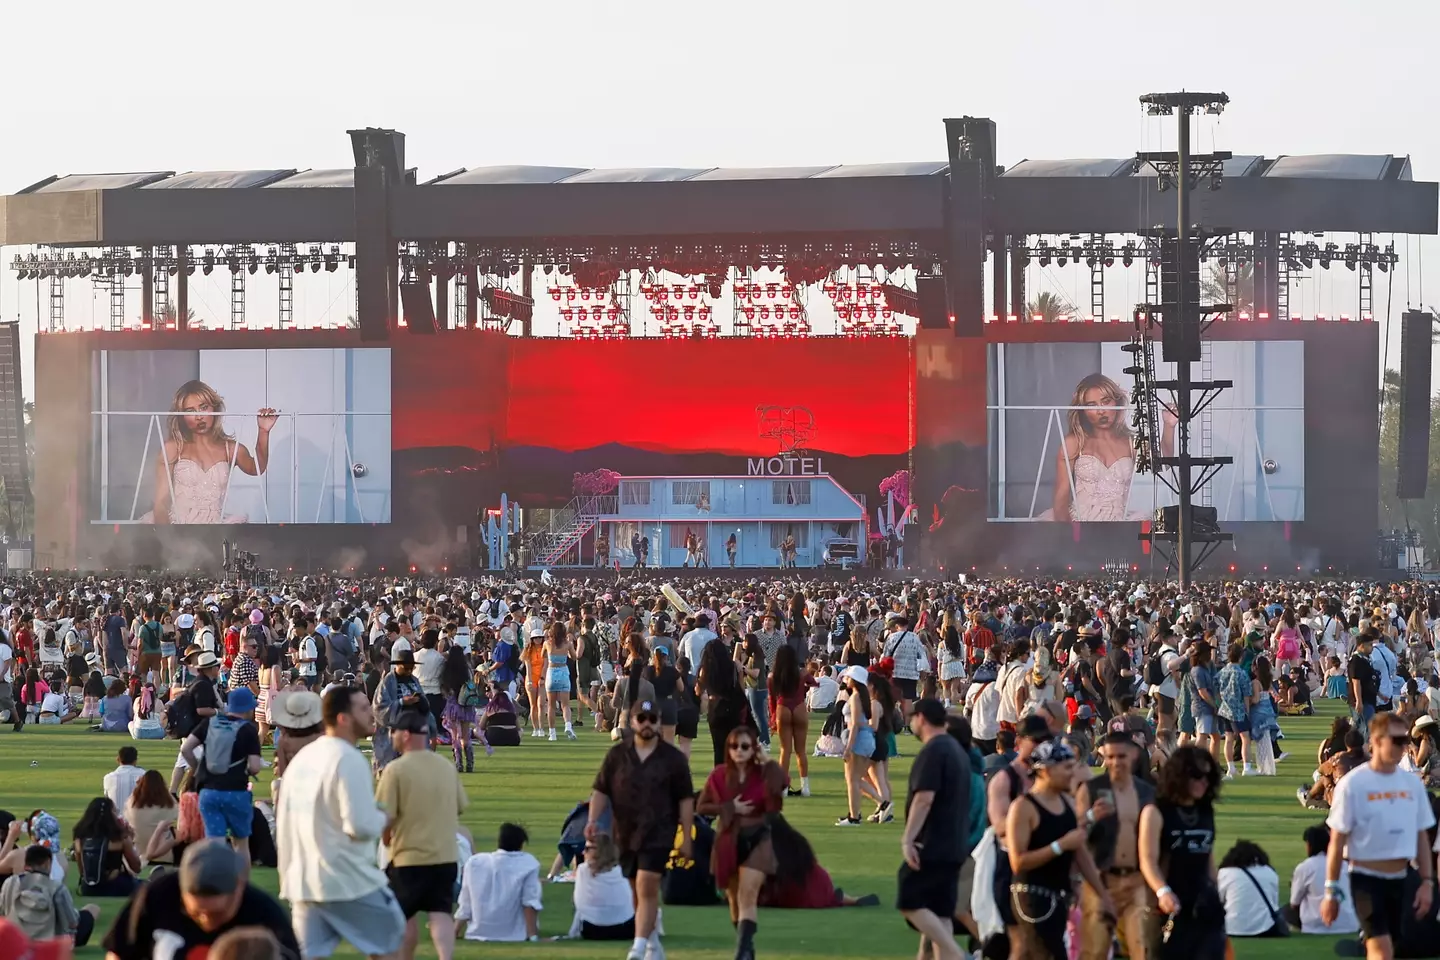 Coachella food and drink prices don't seem to have improved much from last year. (Frazer Harrison/ Getty Images for Coachella) 